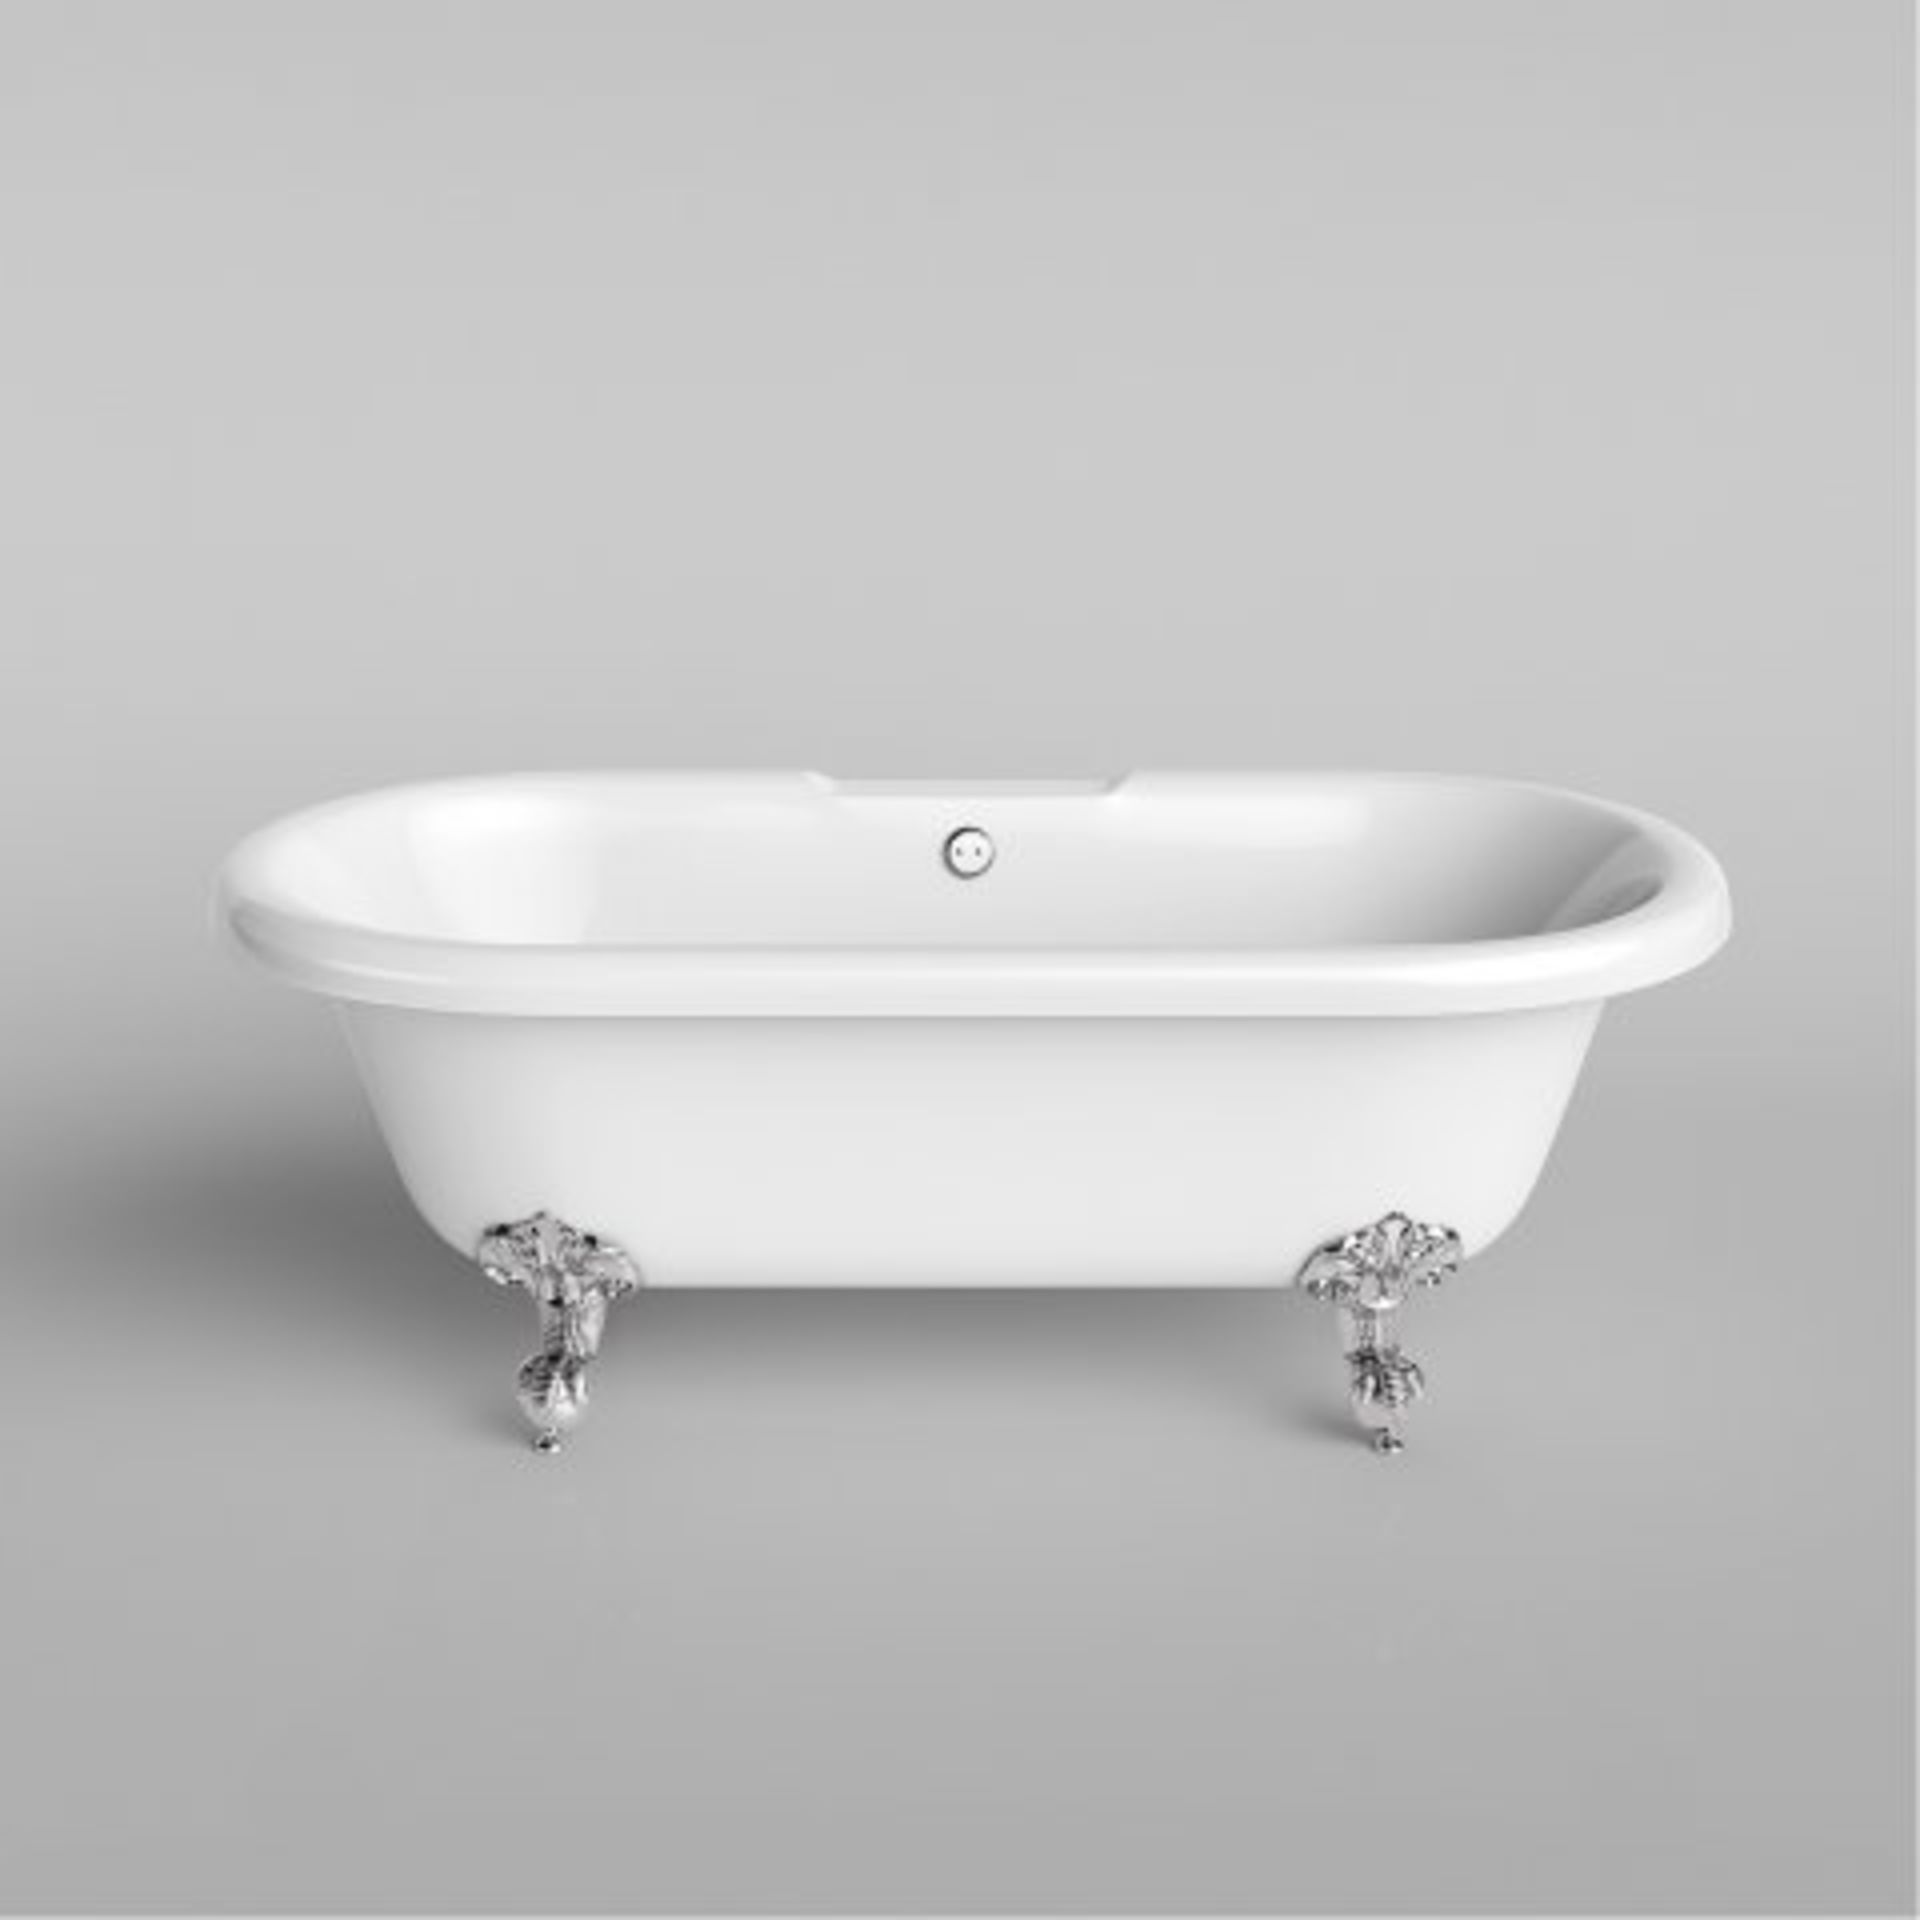 (H4) 1700mm Victoria Traditional Roll Top Bath - Ball Feet - Large. RRP £799.99. This stunning - Image 4 of 4